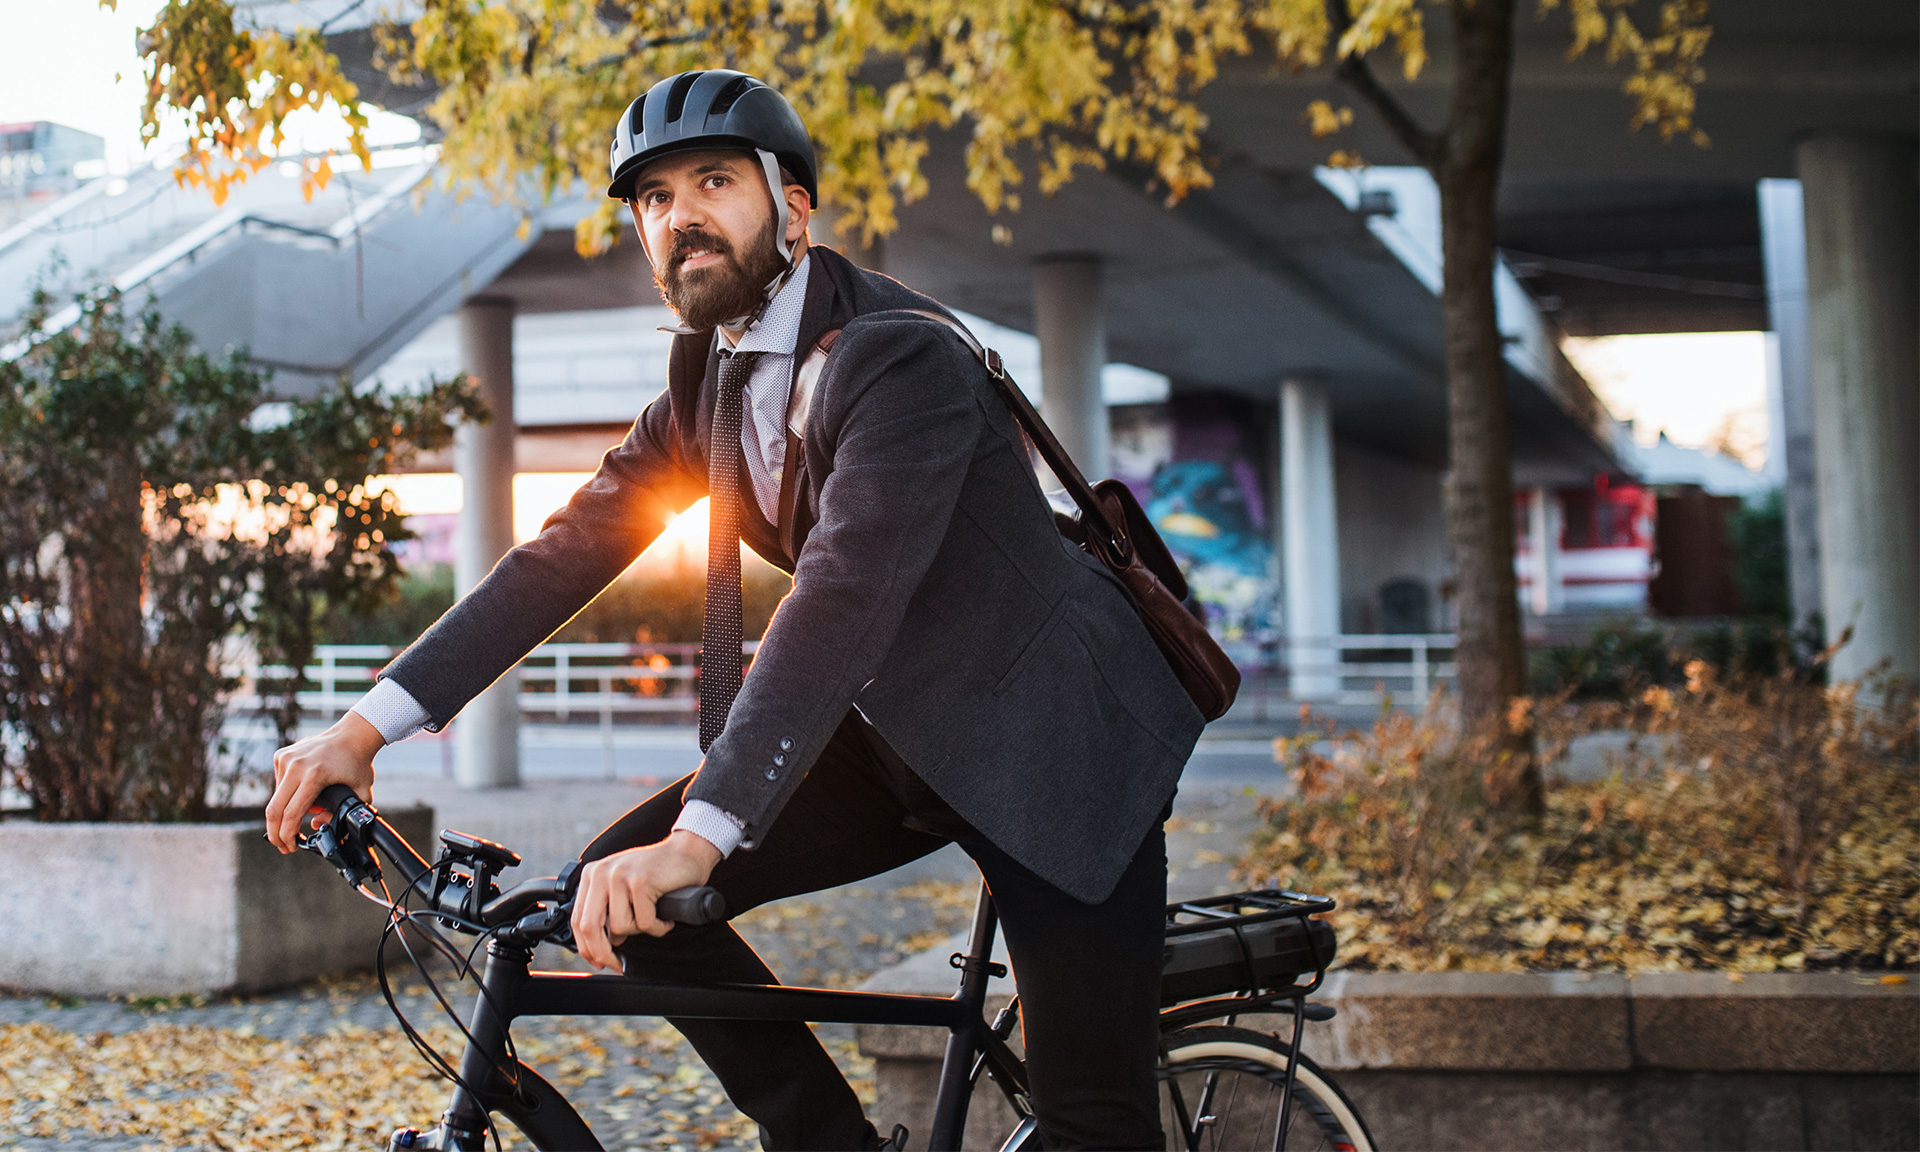 Commuter in suit on electric bike